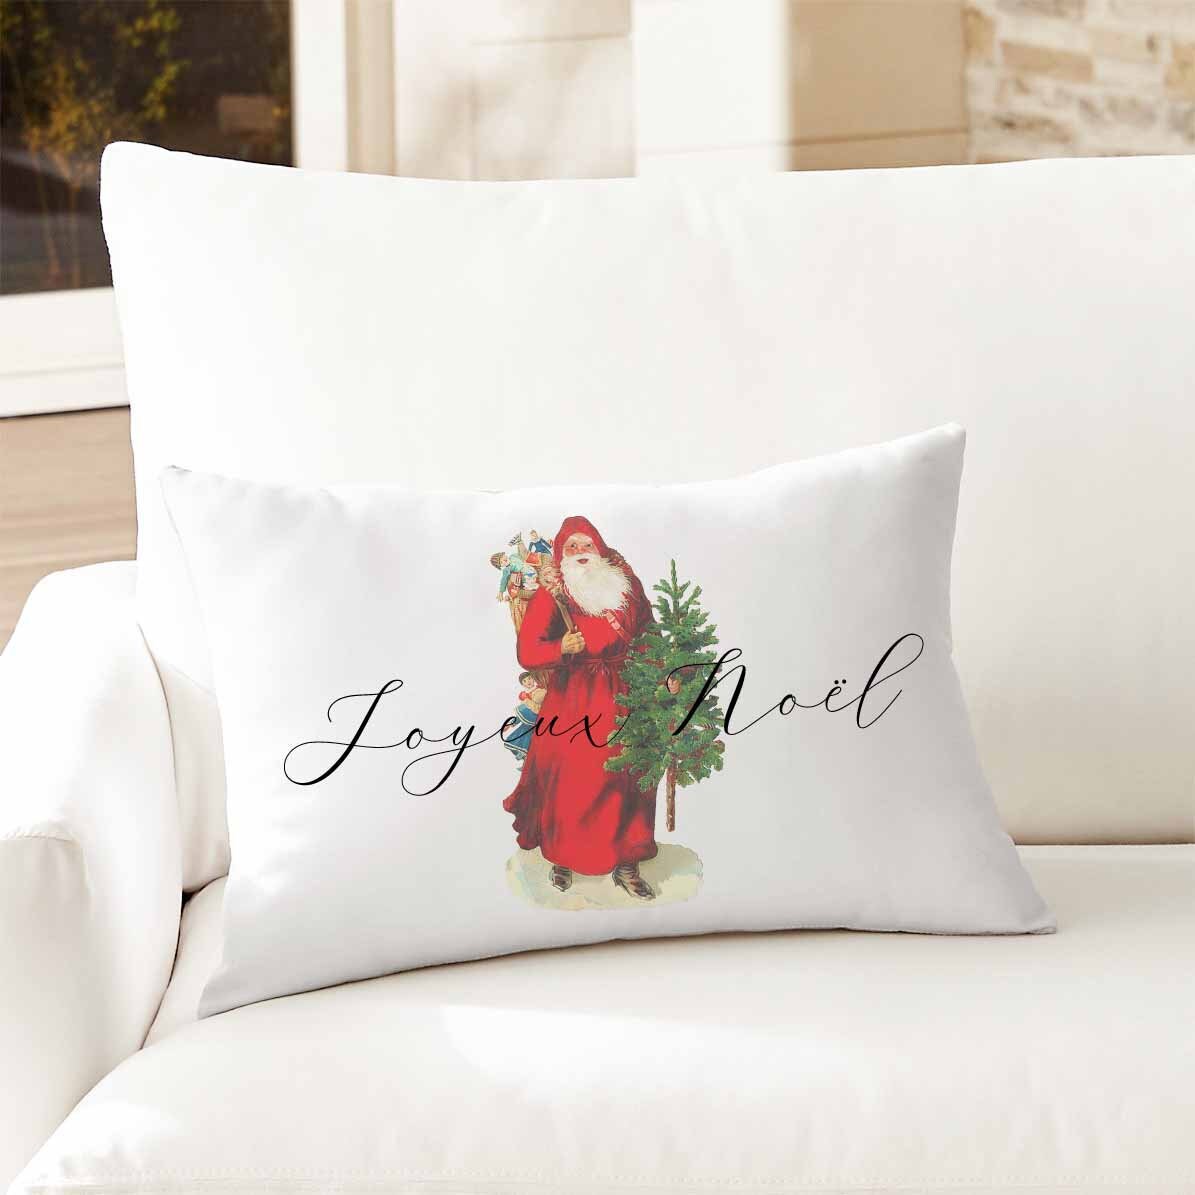 Melrose Beaded Joy and Noel Holiday Pillow (Set of 2)